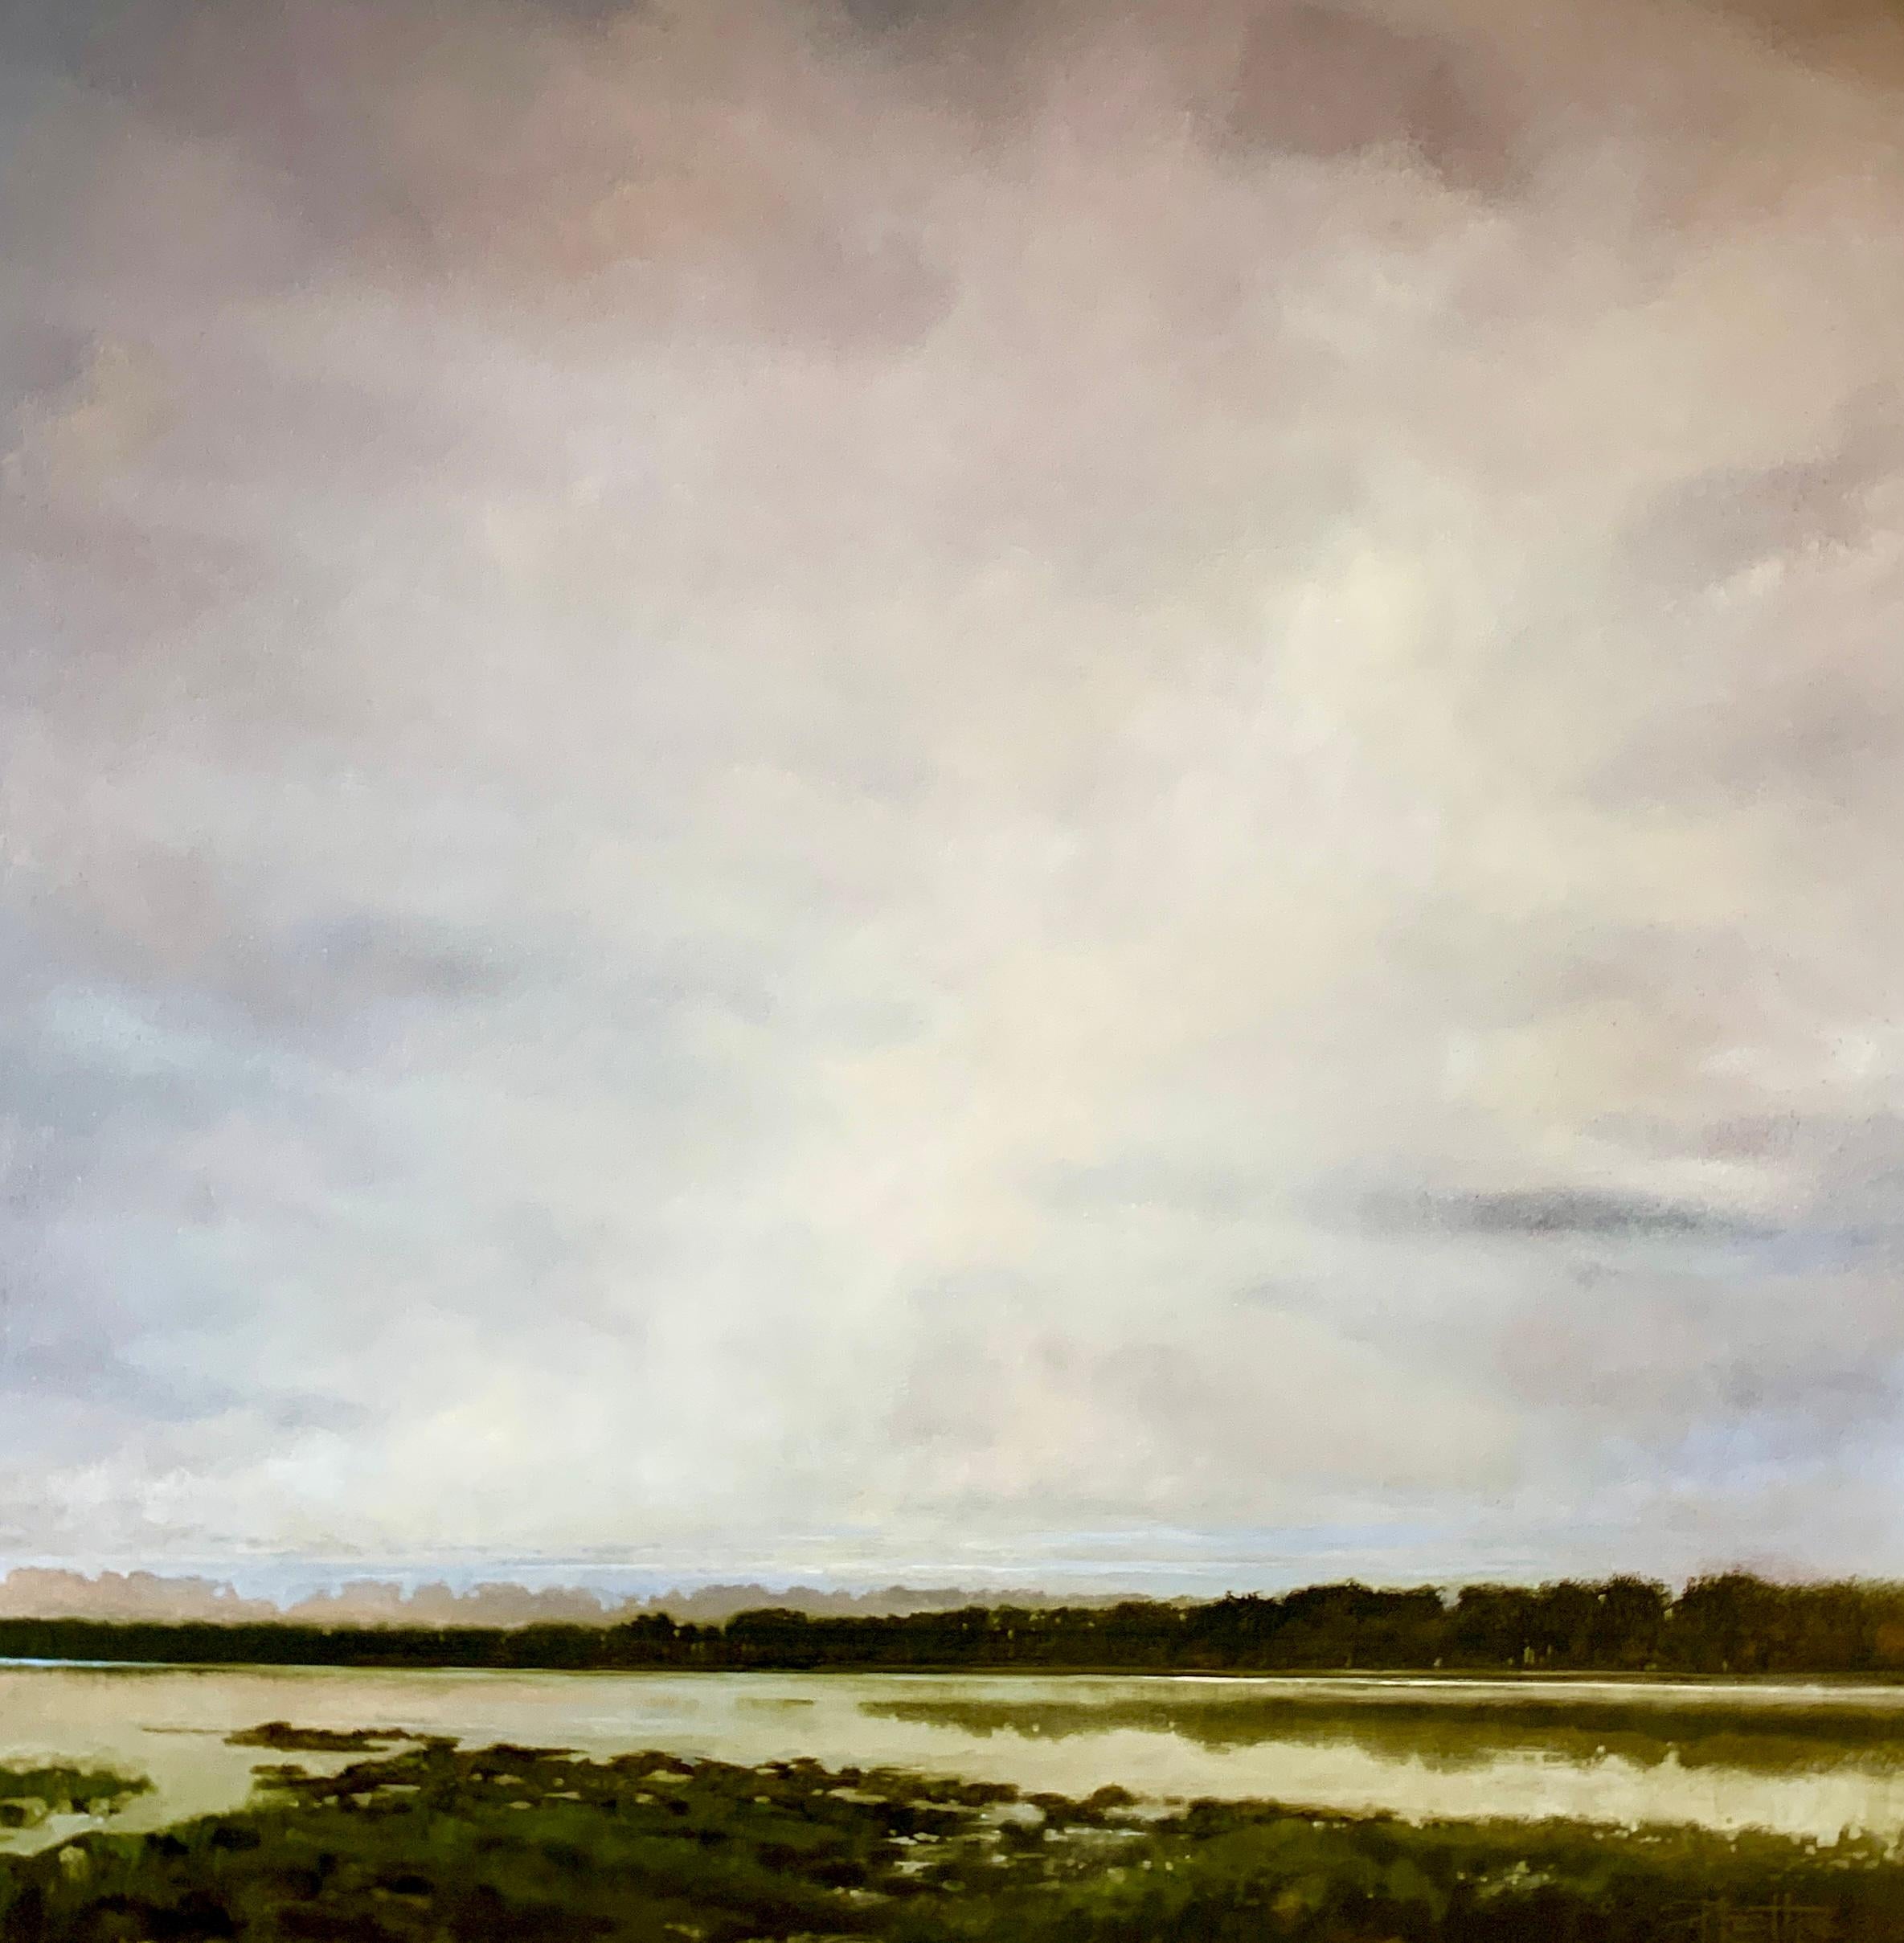 'More Than Just a Memory' is a large contemporary oil on canvas landscape painting created by American artist Doug Foltz in 2021. Featuring a palette made of grey, blue, white and greens among other tones, the painting depicts an exquisite marsh